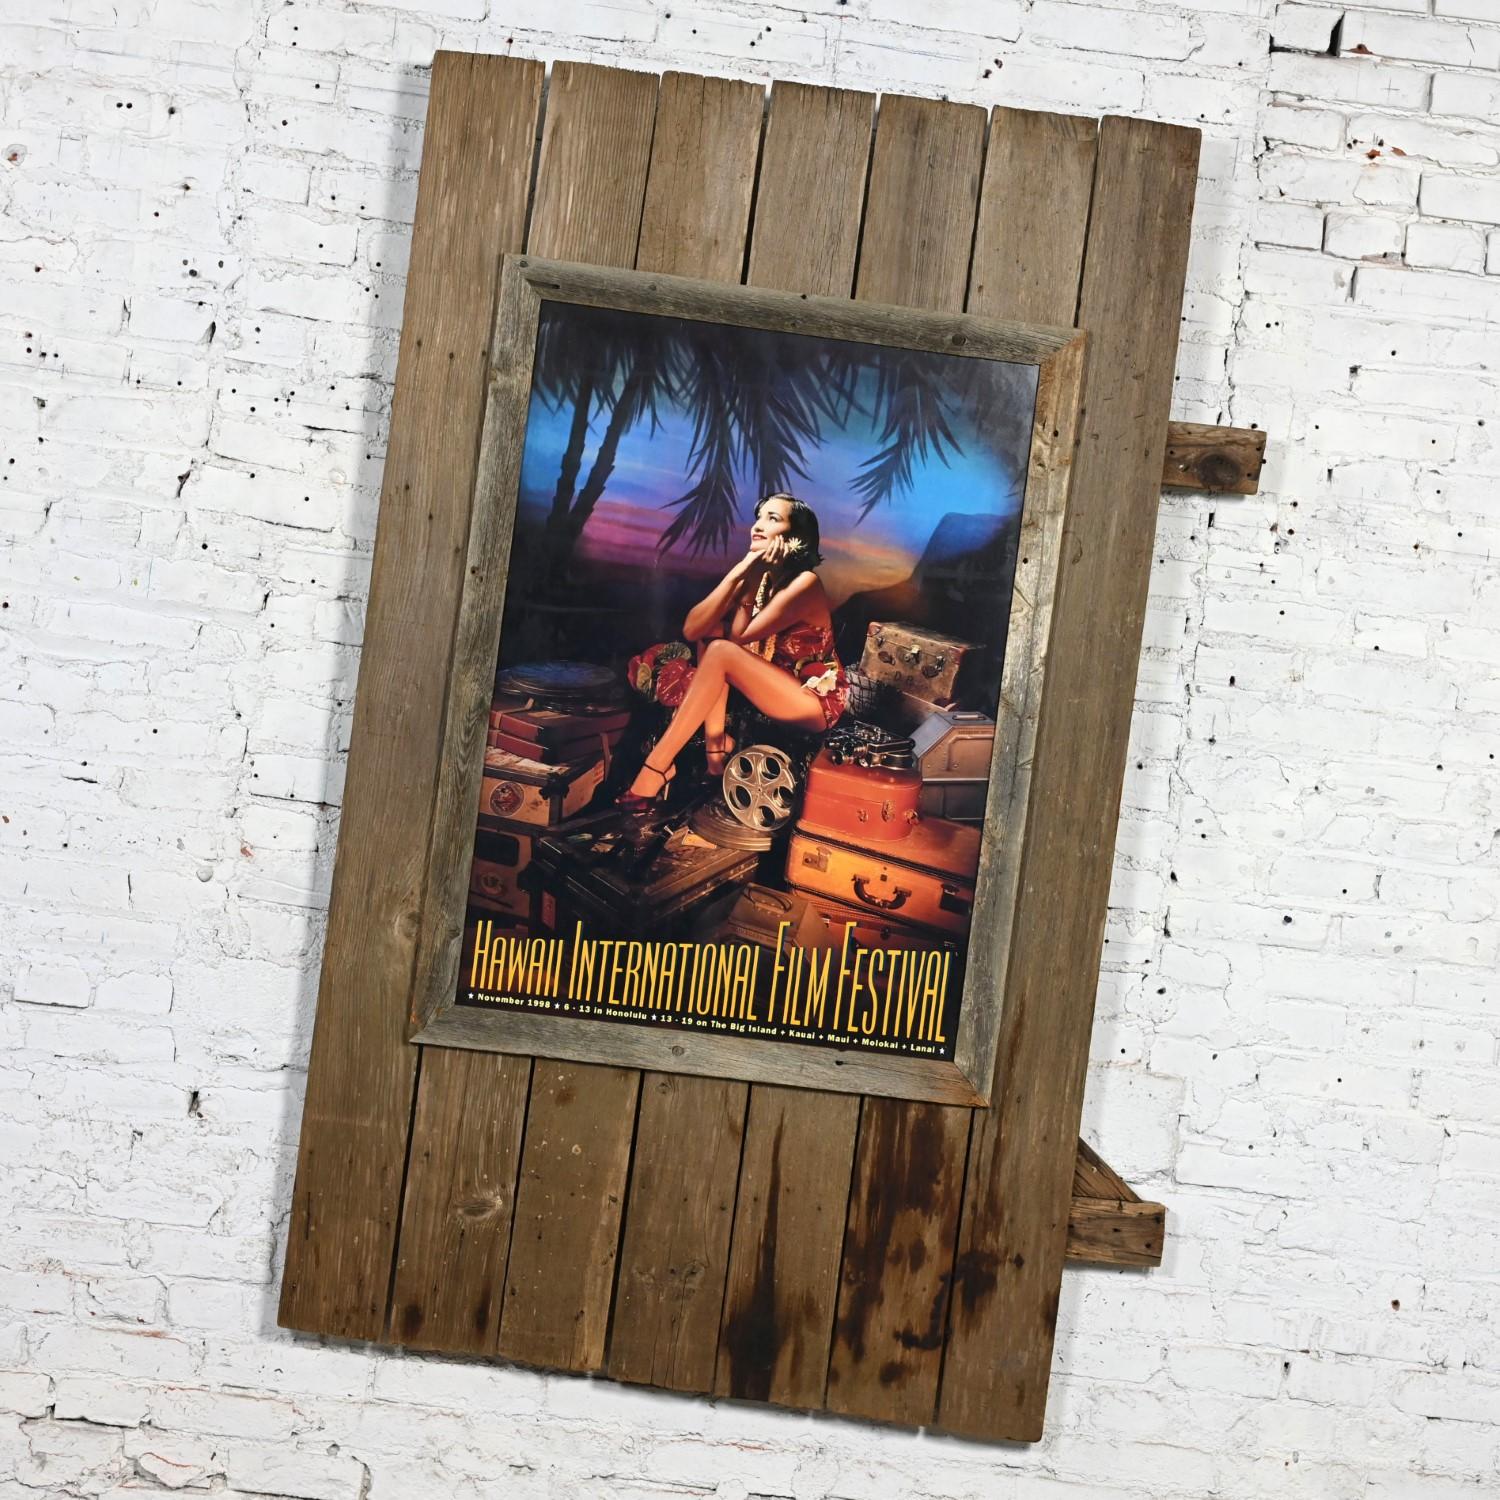 Magnificent vintage Hawaii International Film Festival movie poster on a large-scale Rustic wood mount. Beautiful condition, keeping in mind that this is vintage and not new so will have signs of use and wear even if it has been refinished or